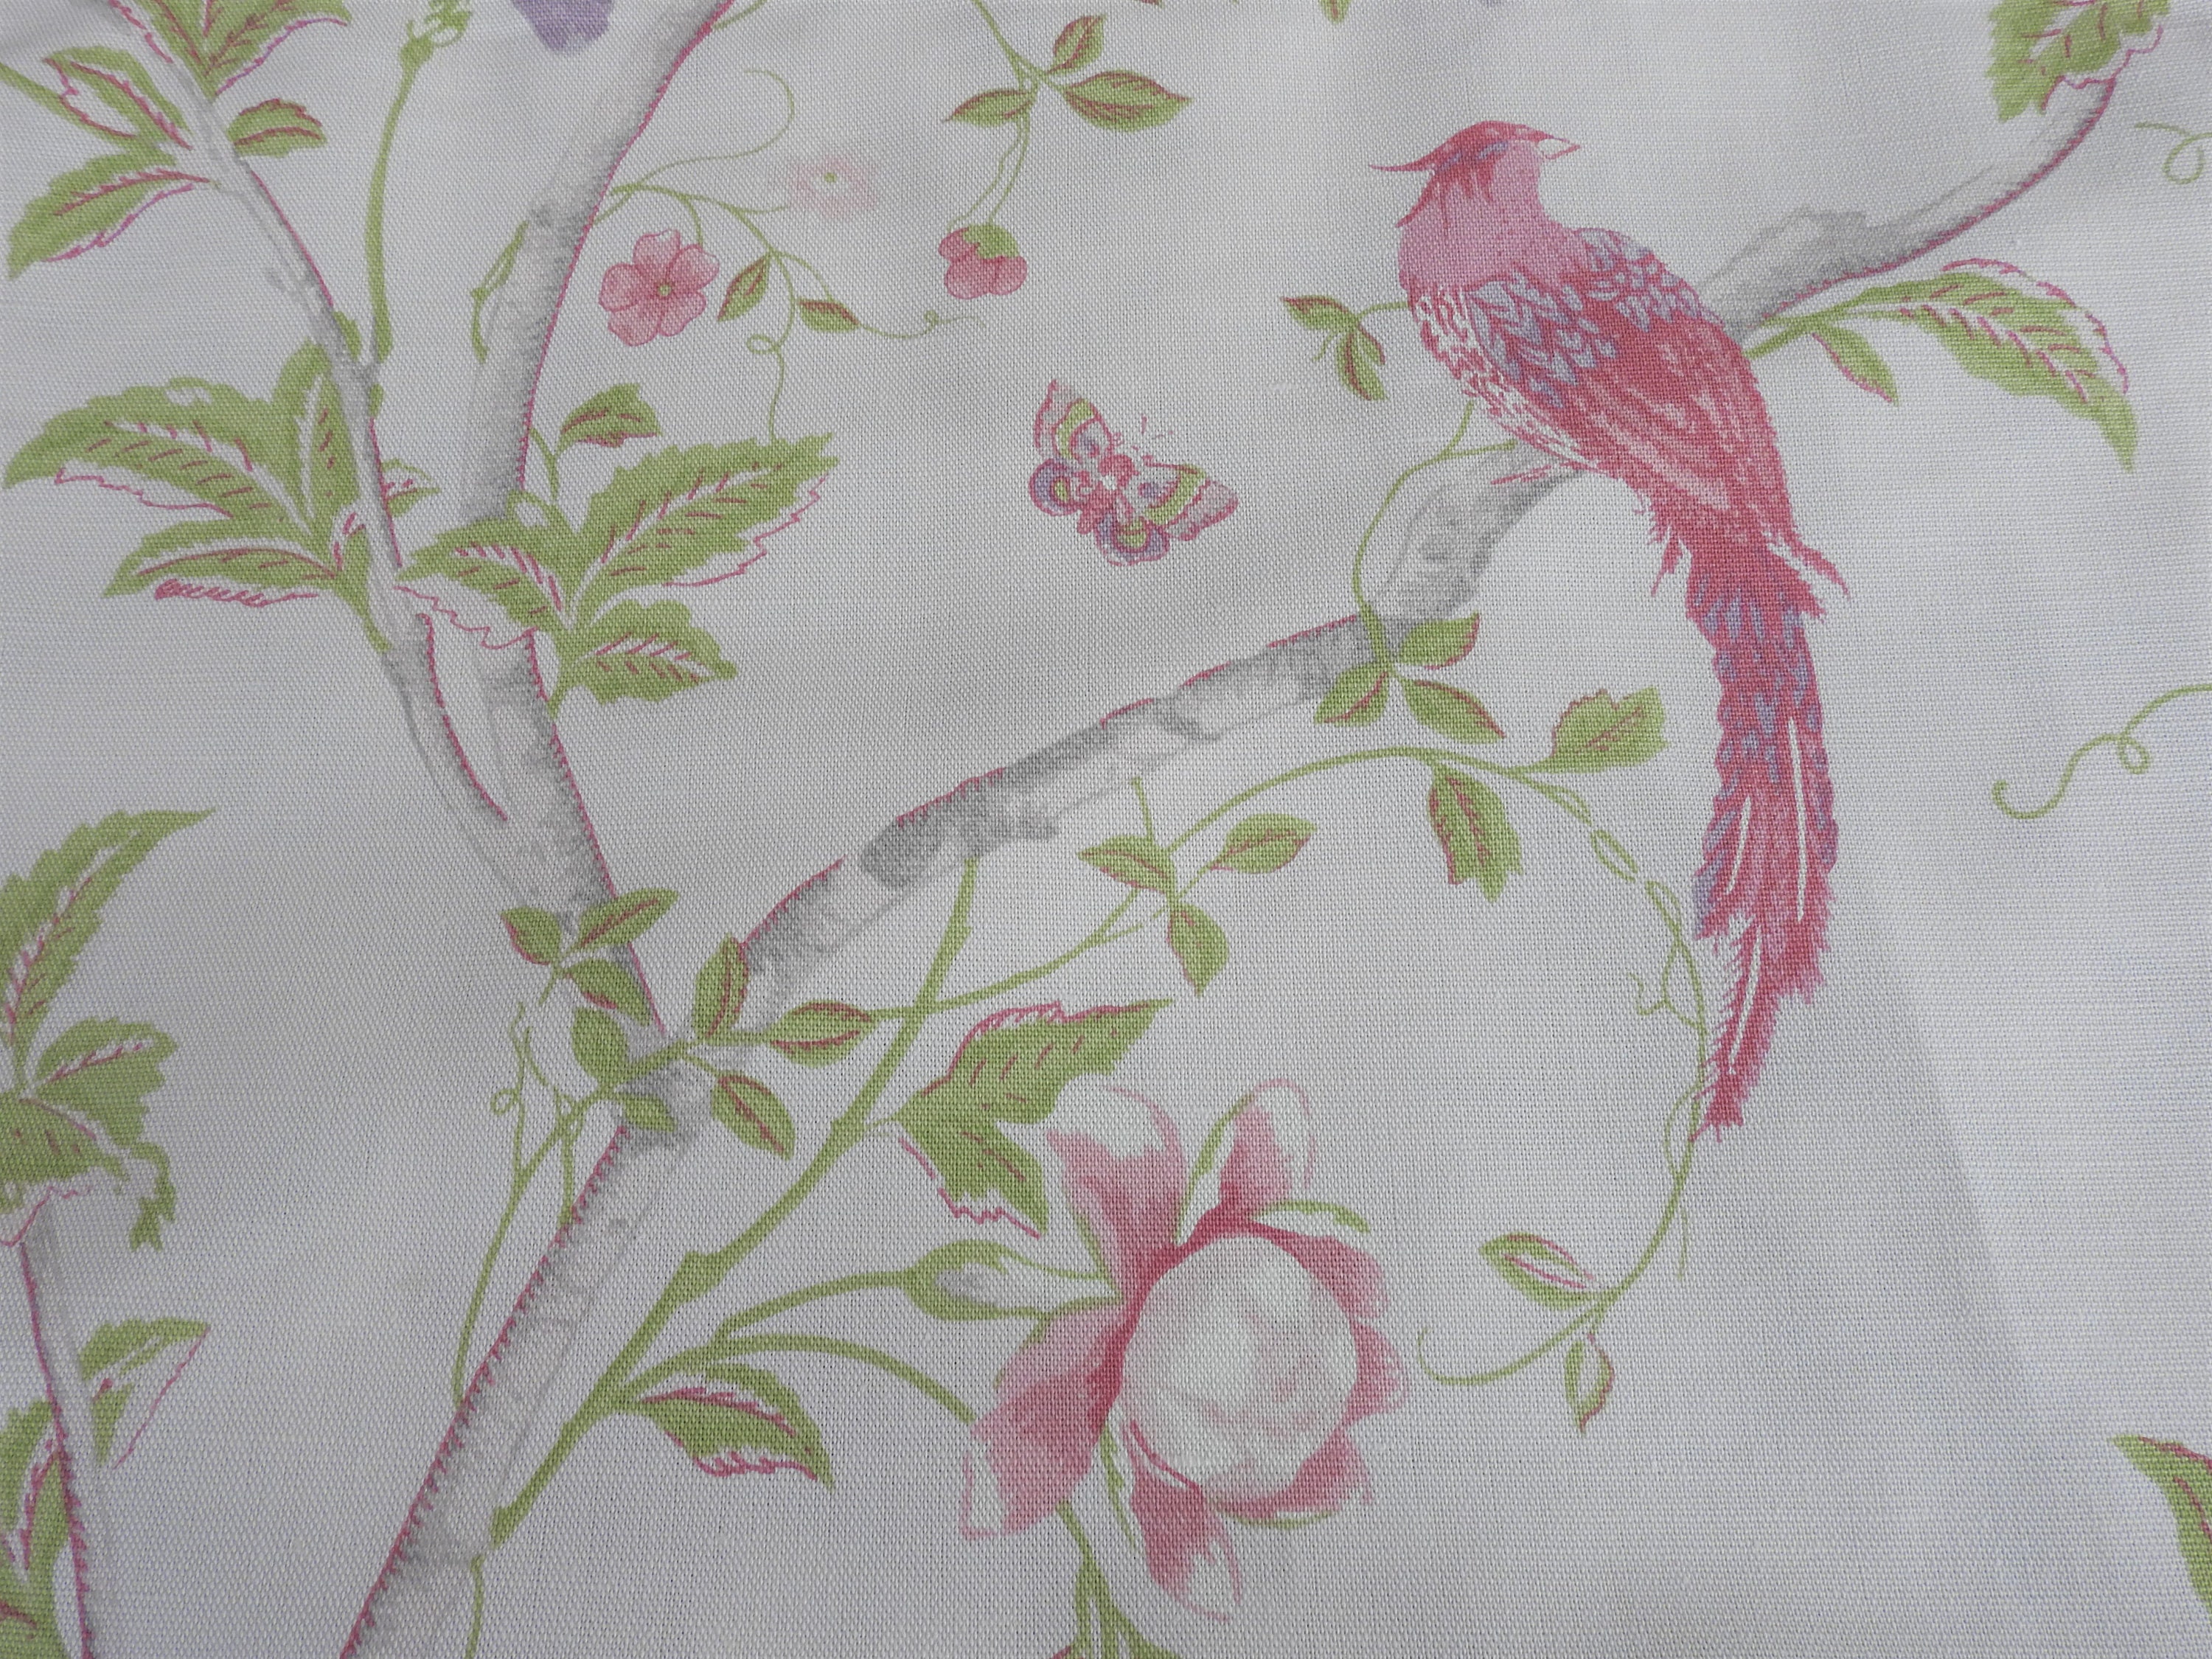 10 Yds of 55-57 Wide LAURA ASHLEY LINEN Fabric summer Palace Great Price 